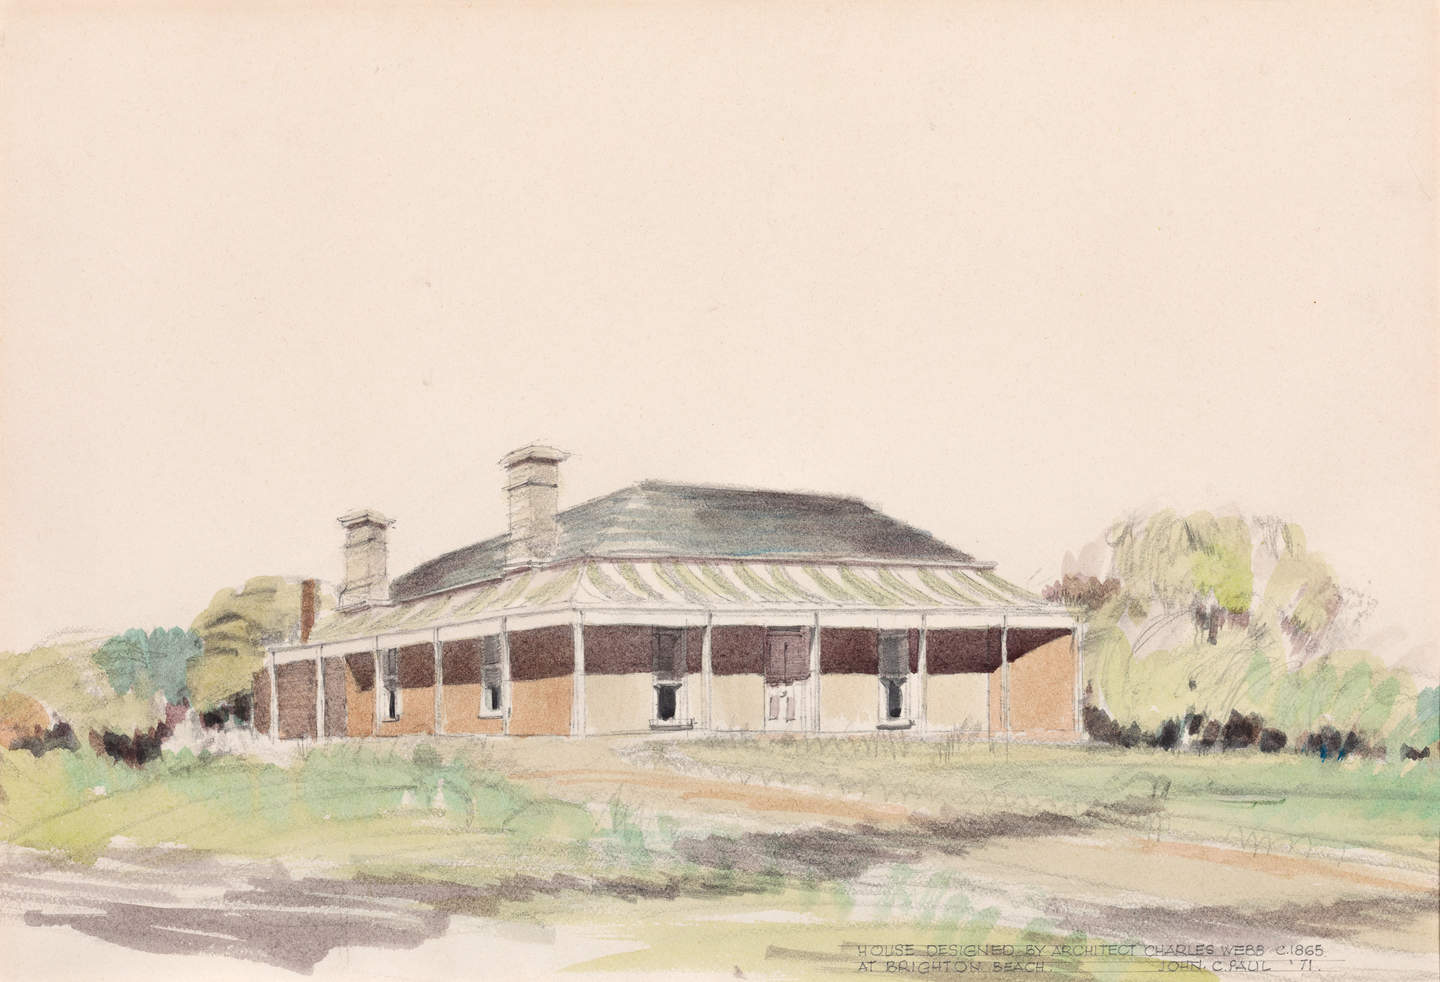 Watercolour of a single story brick house with wrap around verandah. The house is surrounded by green grass and trees.